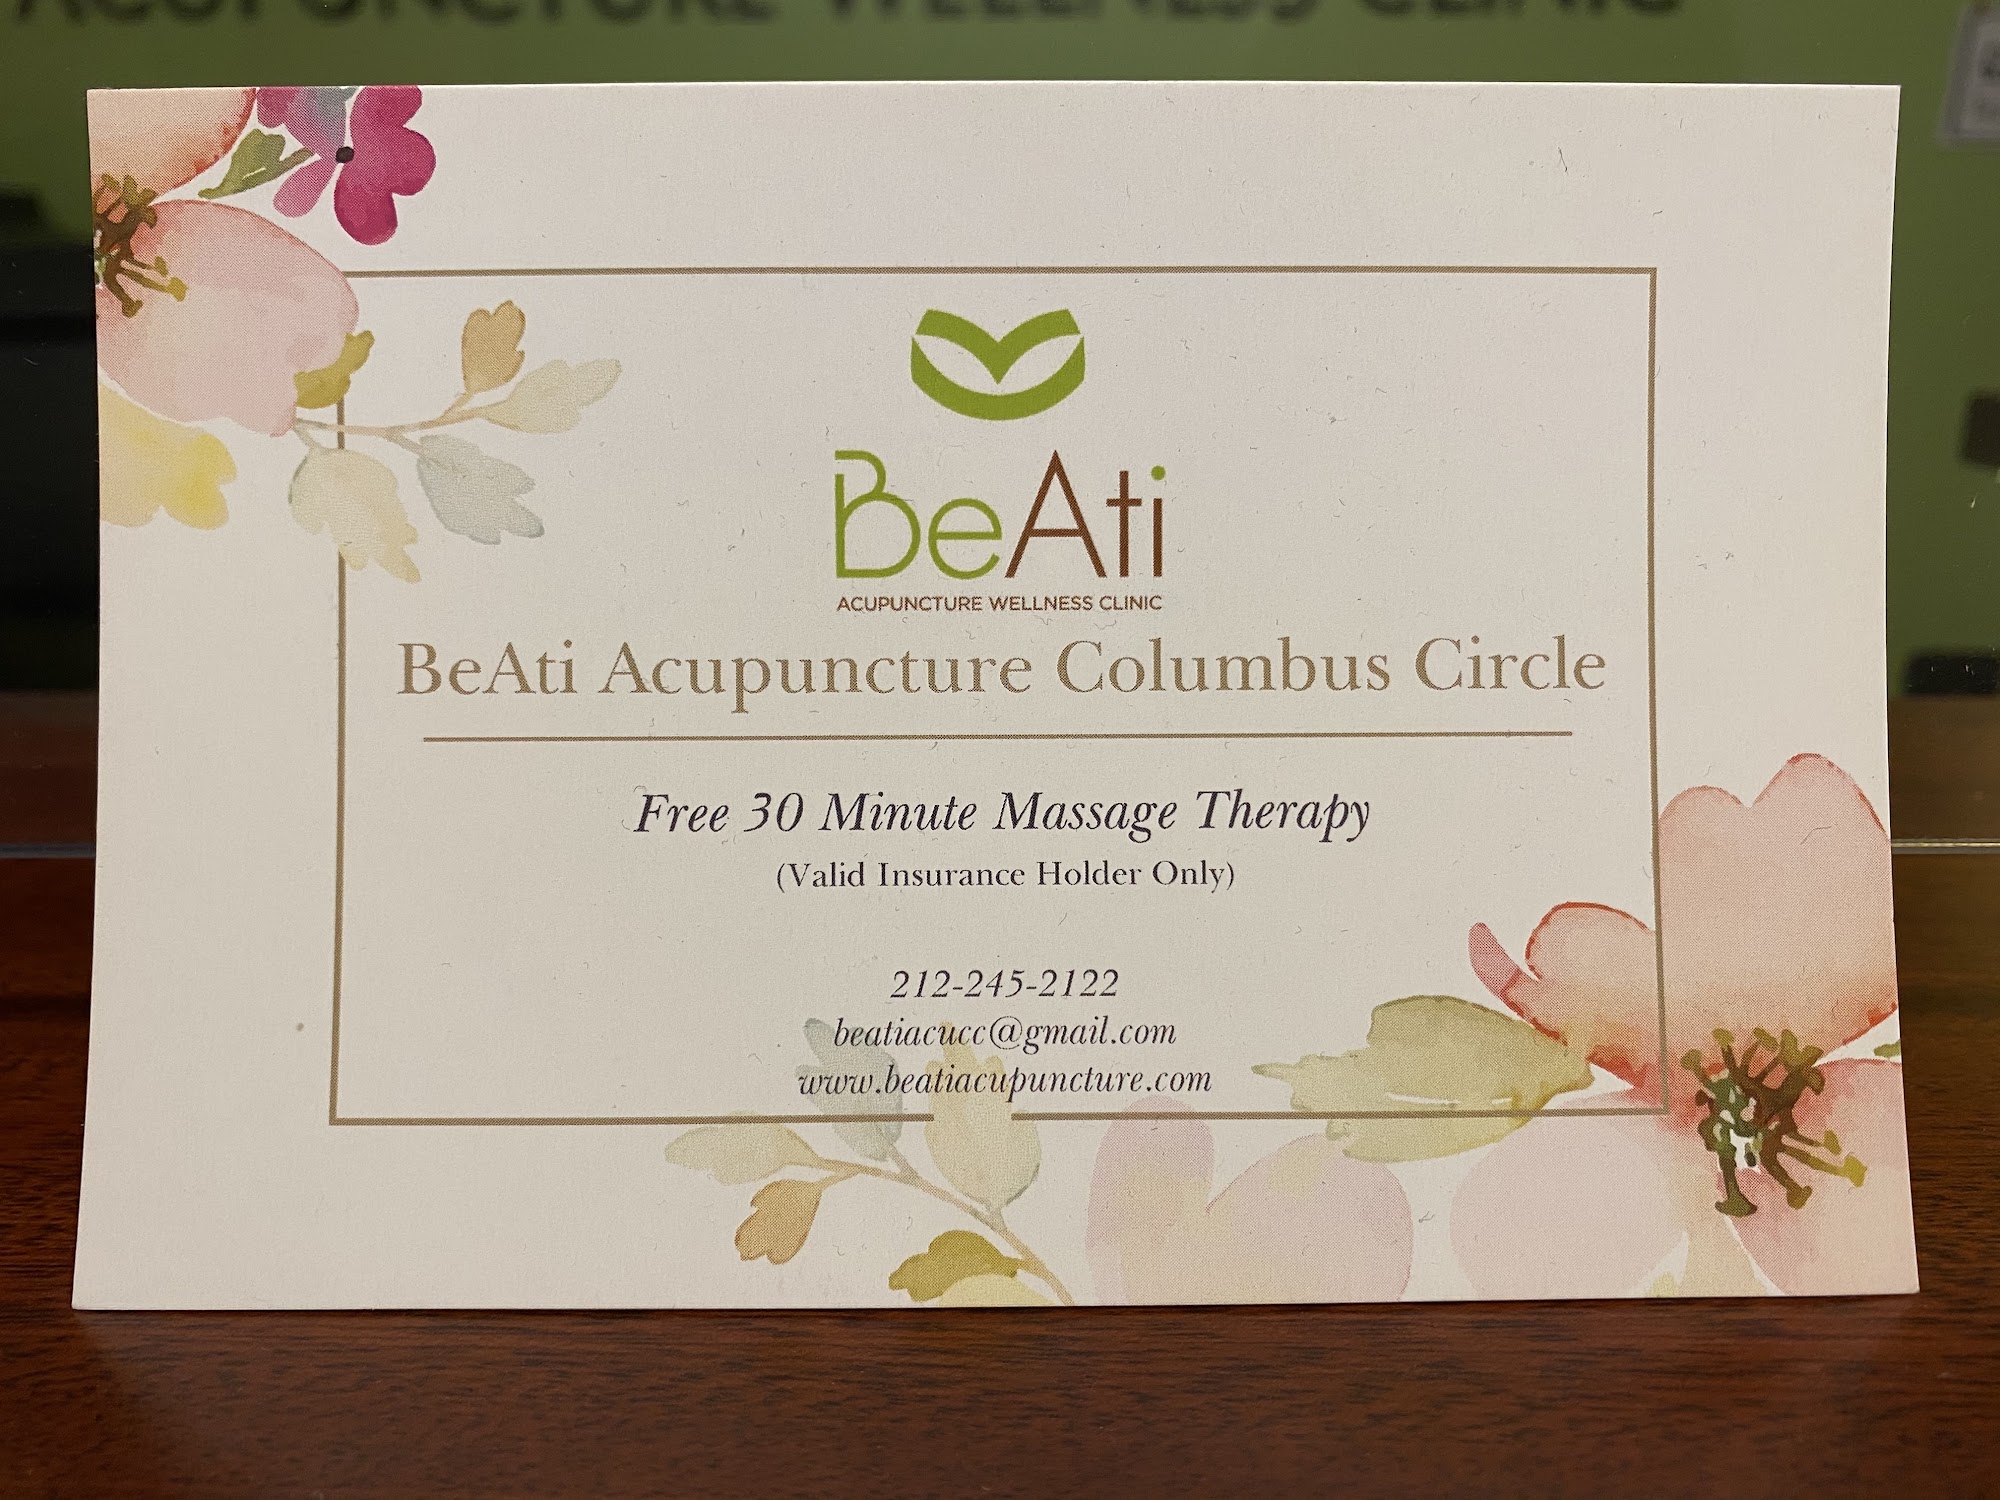 BeAti Acupuncture Wellness & Physical Therapy